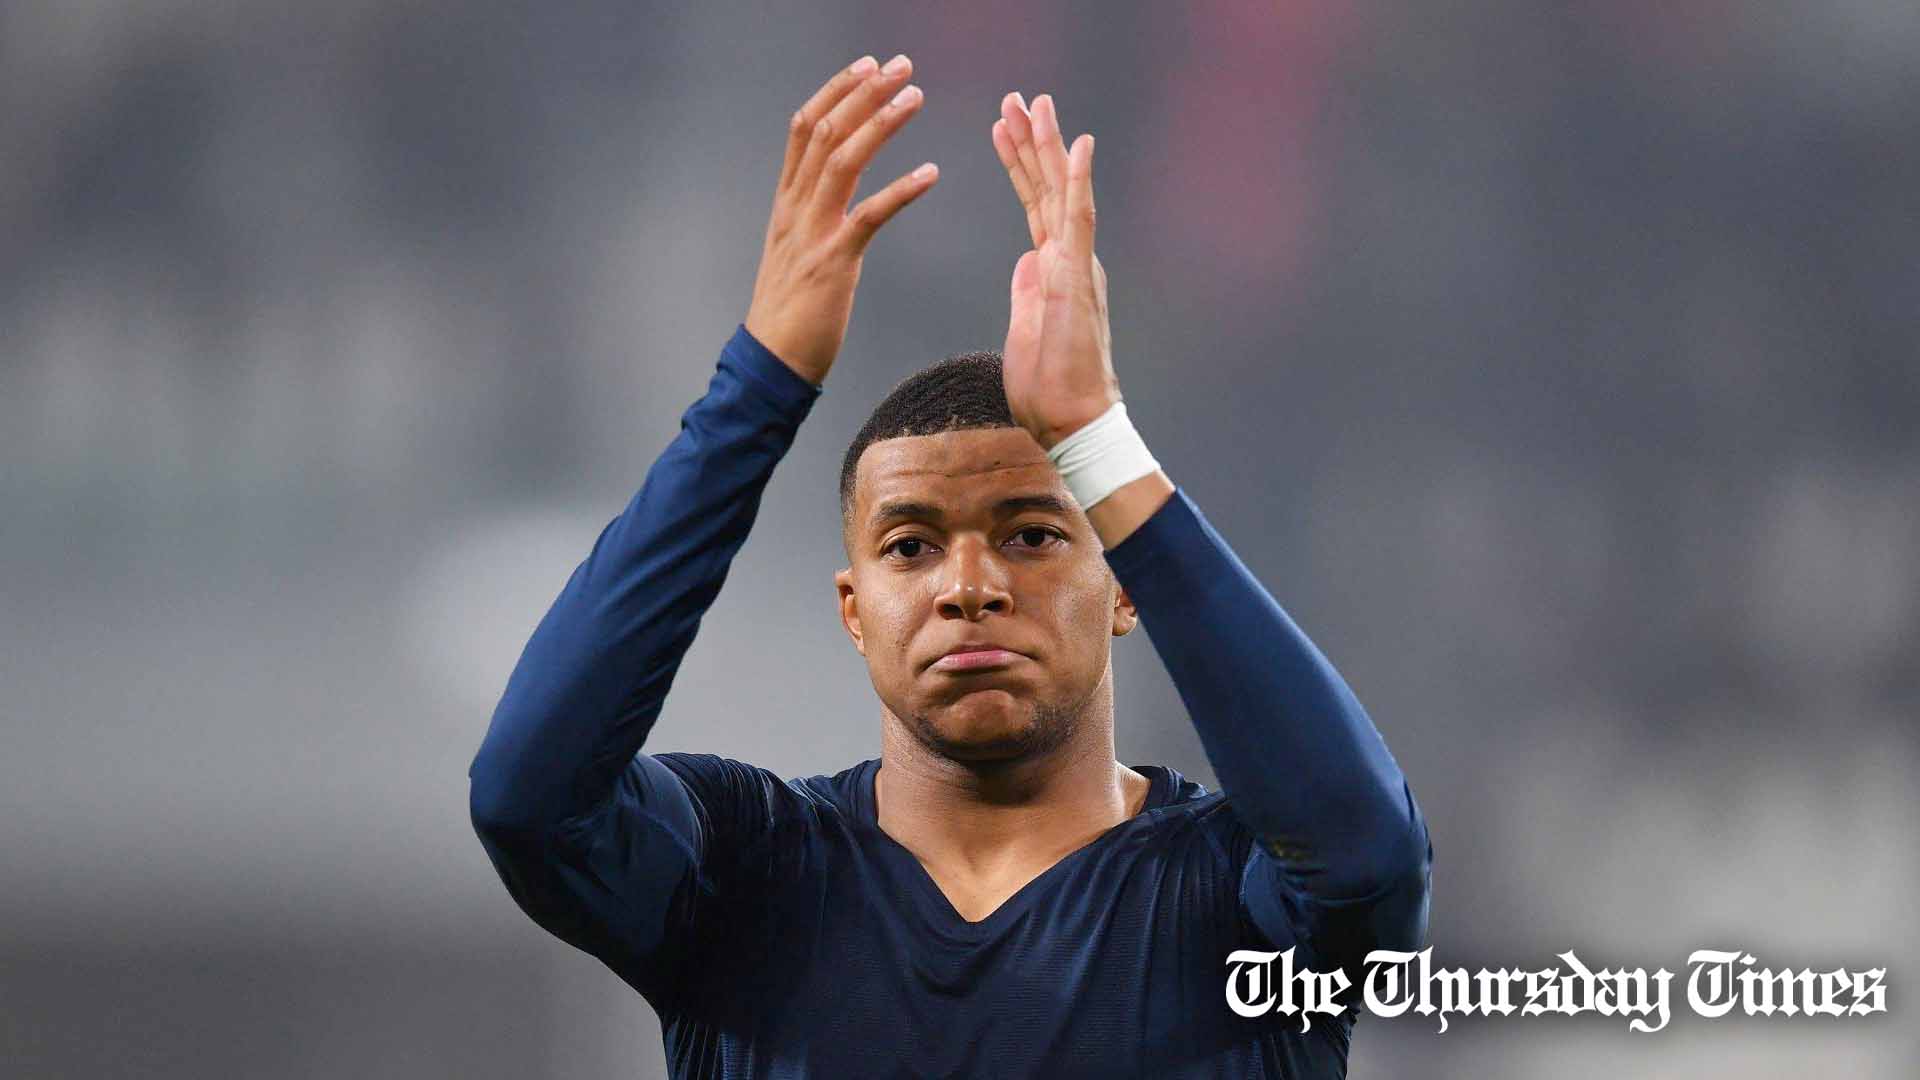 Kylian Mbappé is shown at Paris in 2020. — FILE/THE THURSDAY TIMES